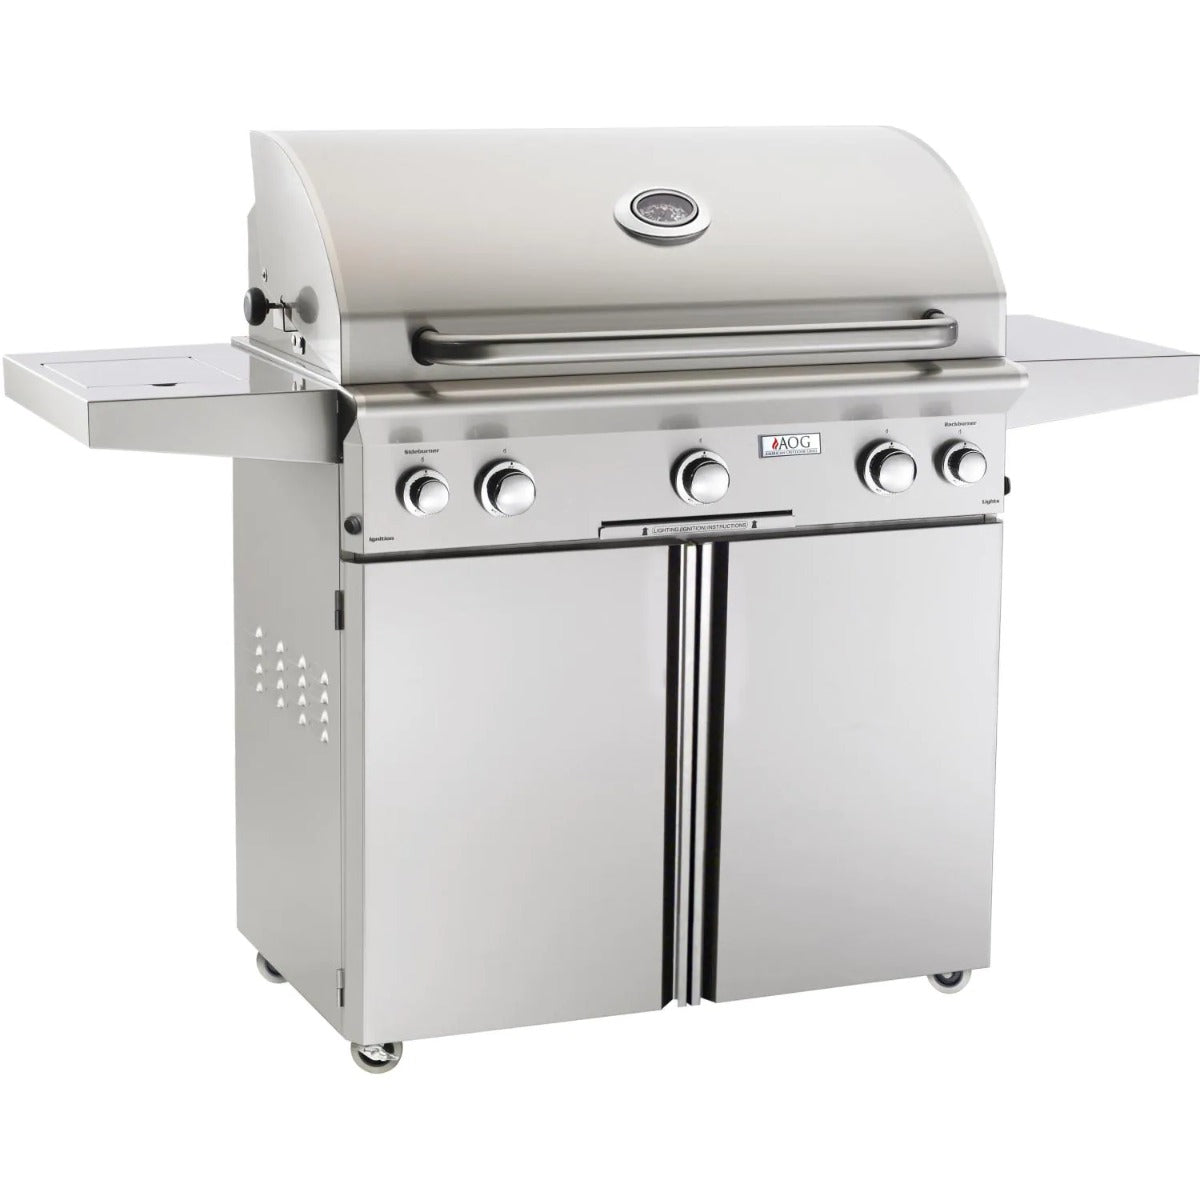 American Outdoor Grill L-Series 36 Inch 3 Burner with Single Side Burner Freestanding Propane Gas Grill